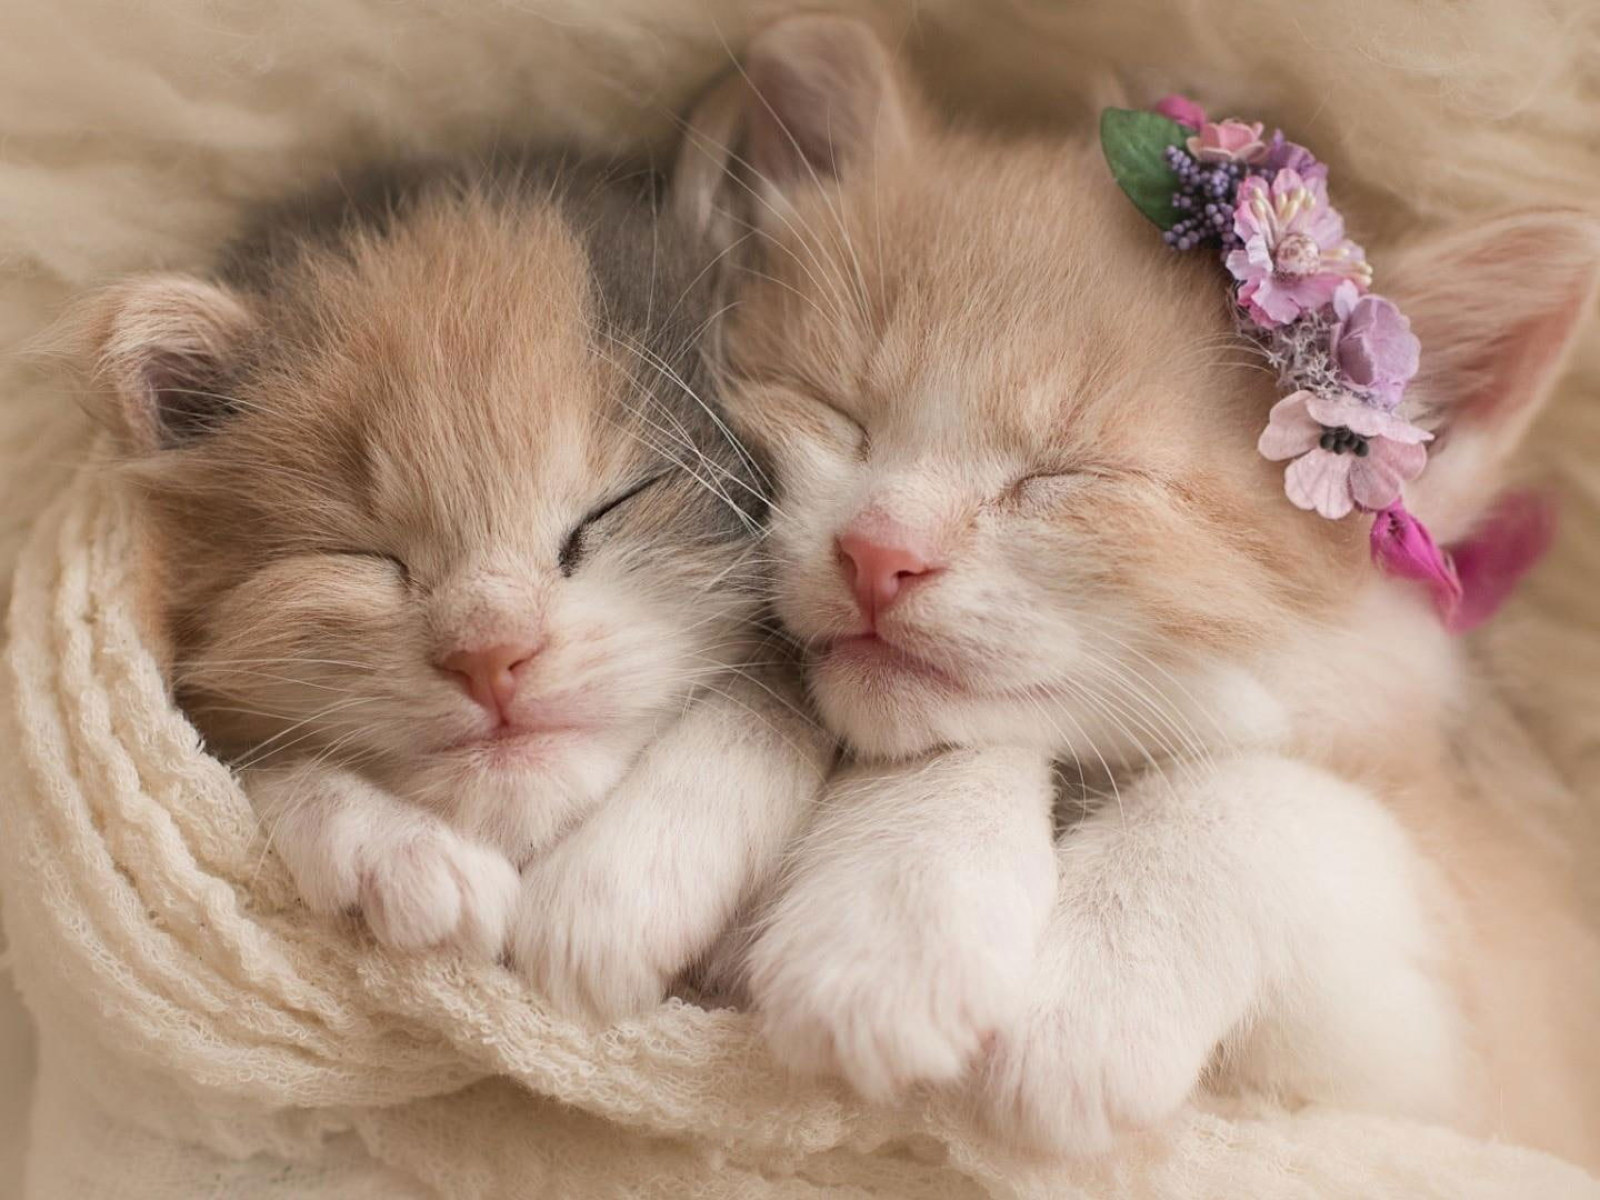 Two White And Orange Tabby Kittens Wallpaper, Kitty, Cat, Cats, Sleep, Sleeping • Wallpaper For You